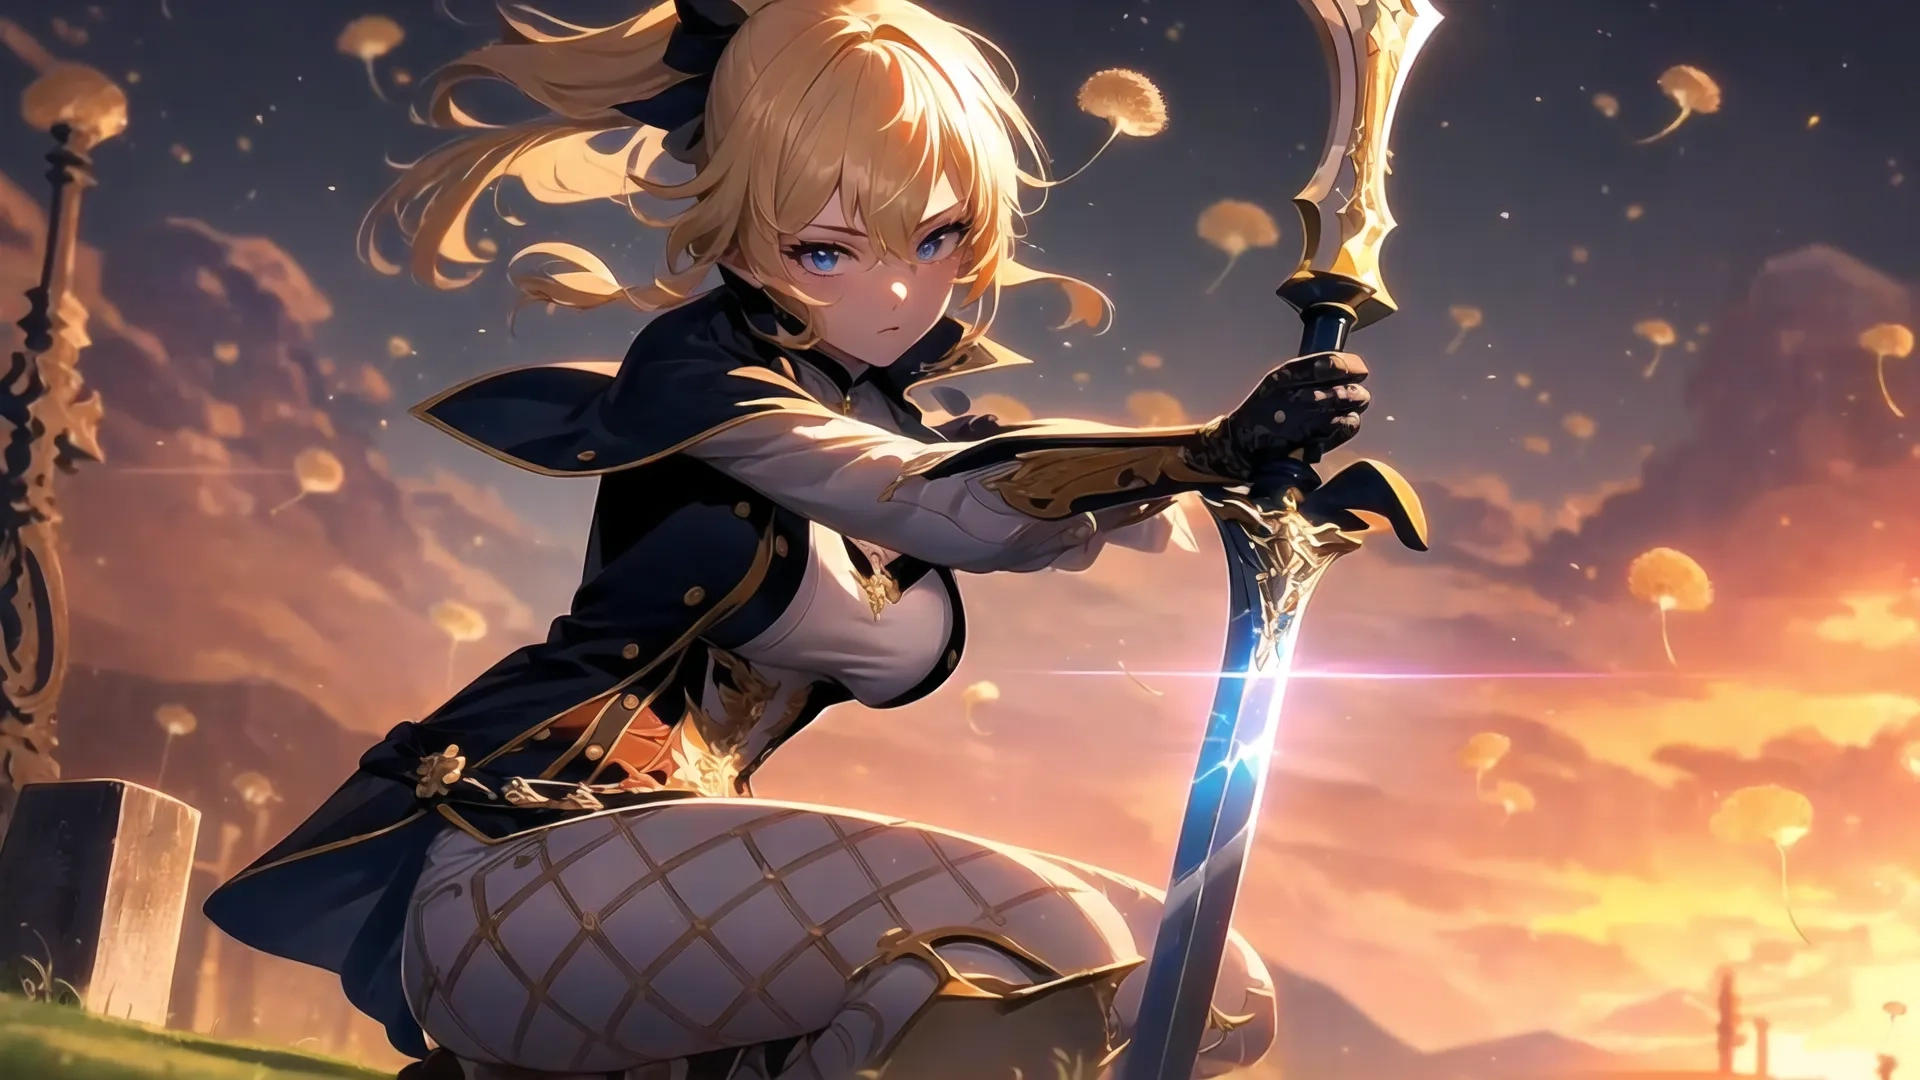 girl with a sword in her hand sitting on the ground while surrounded by stones and burning sky beyond by a mountain, sunset or sun
